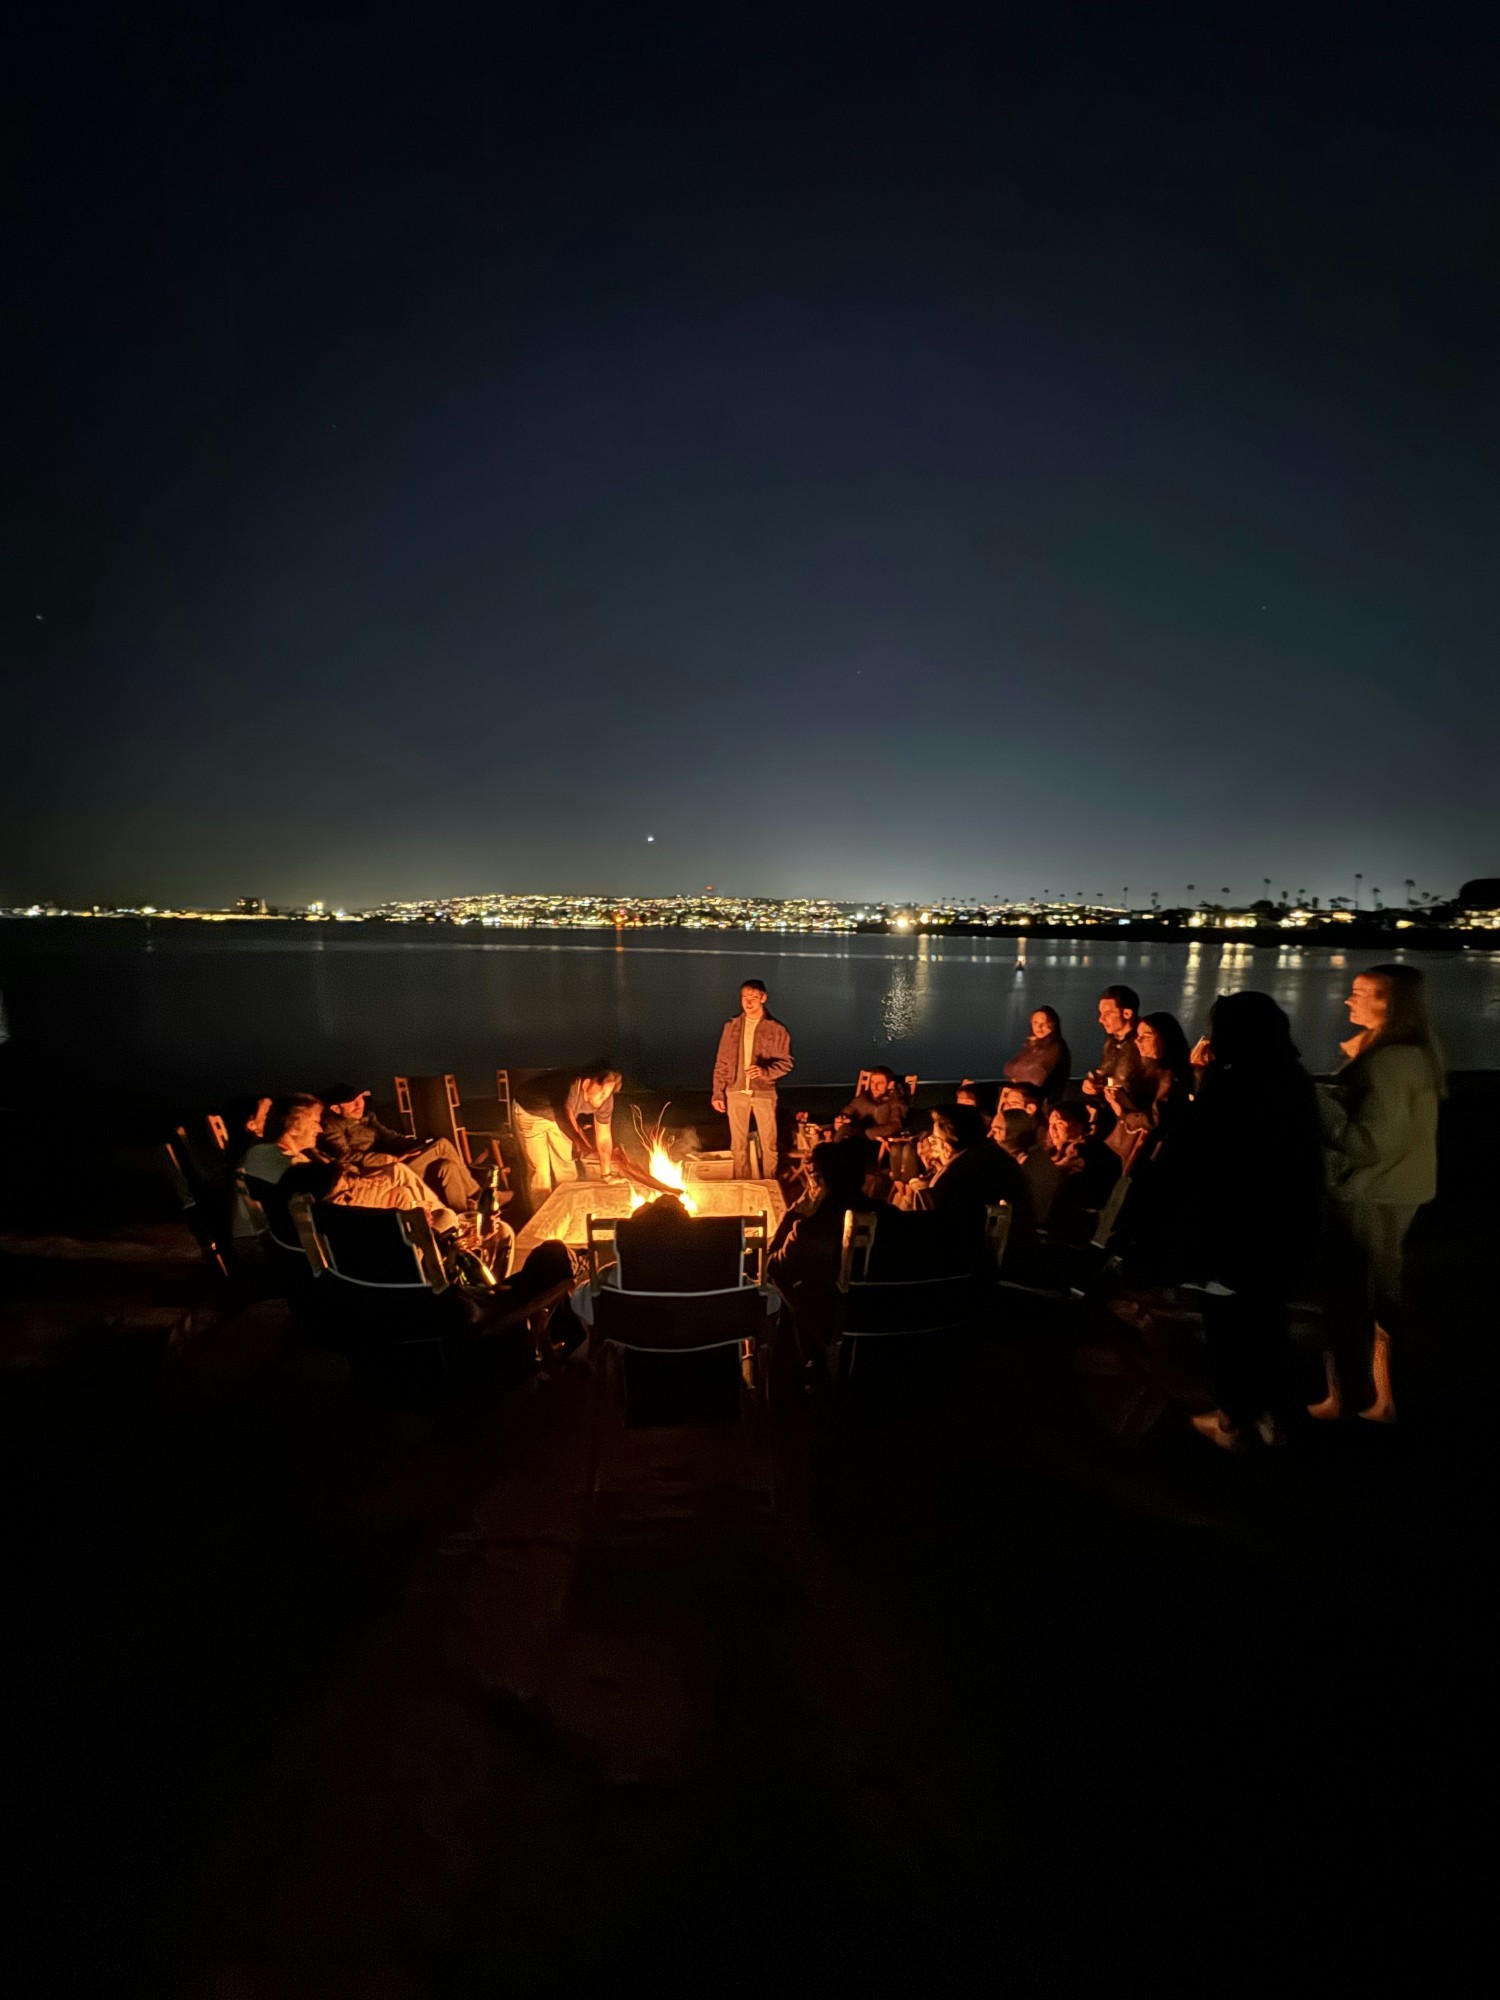 Artefact bonfire: Fueling camaraderie with warmth and memories.